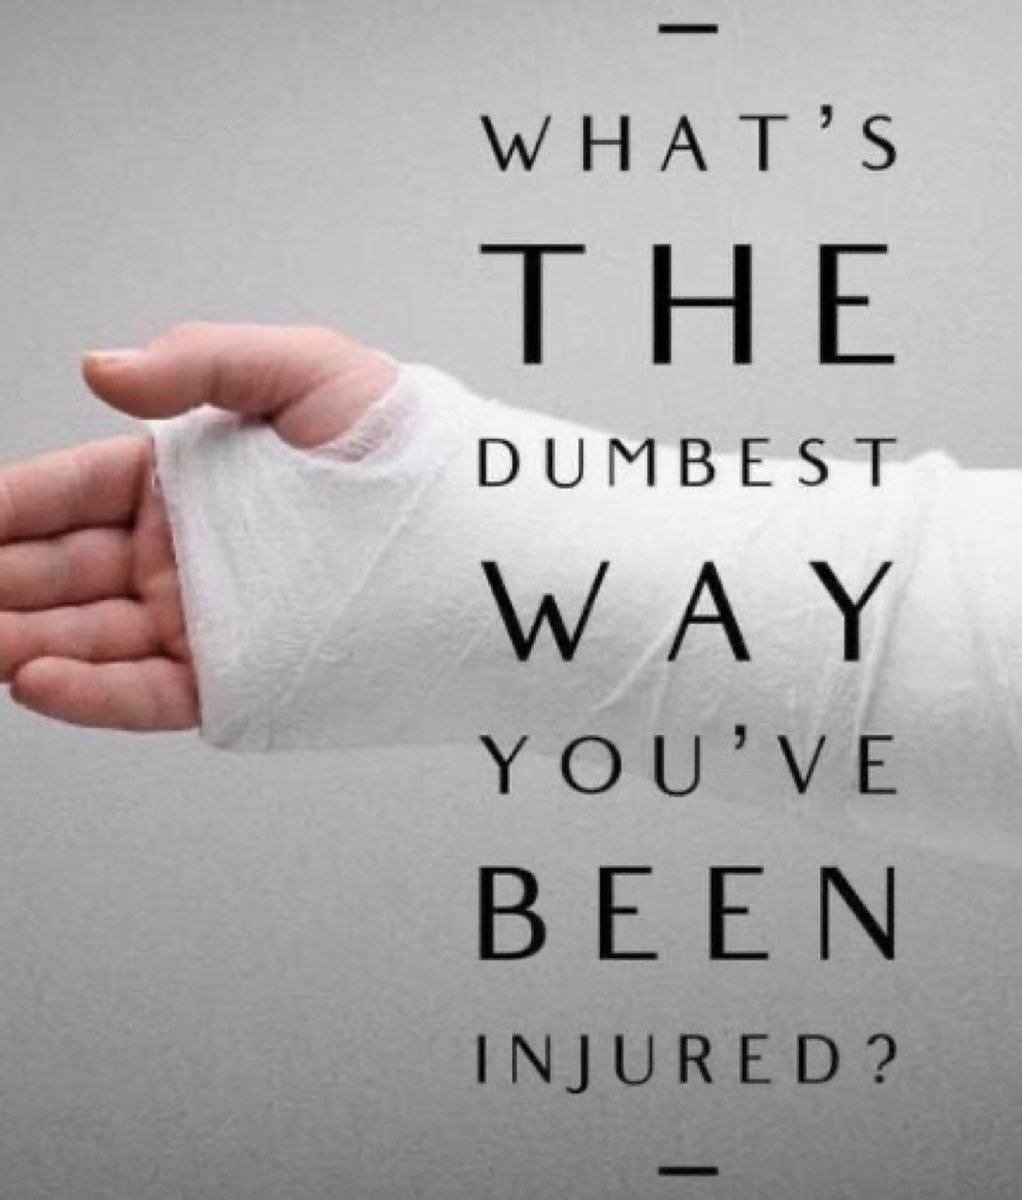 I broke my wrist in a game of hackysack when I was in the 4th grade. Shattered it falling down from running backwards in a no contact sport. 

Be impressed.